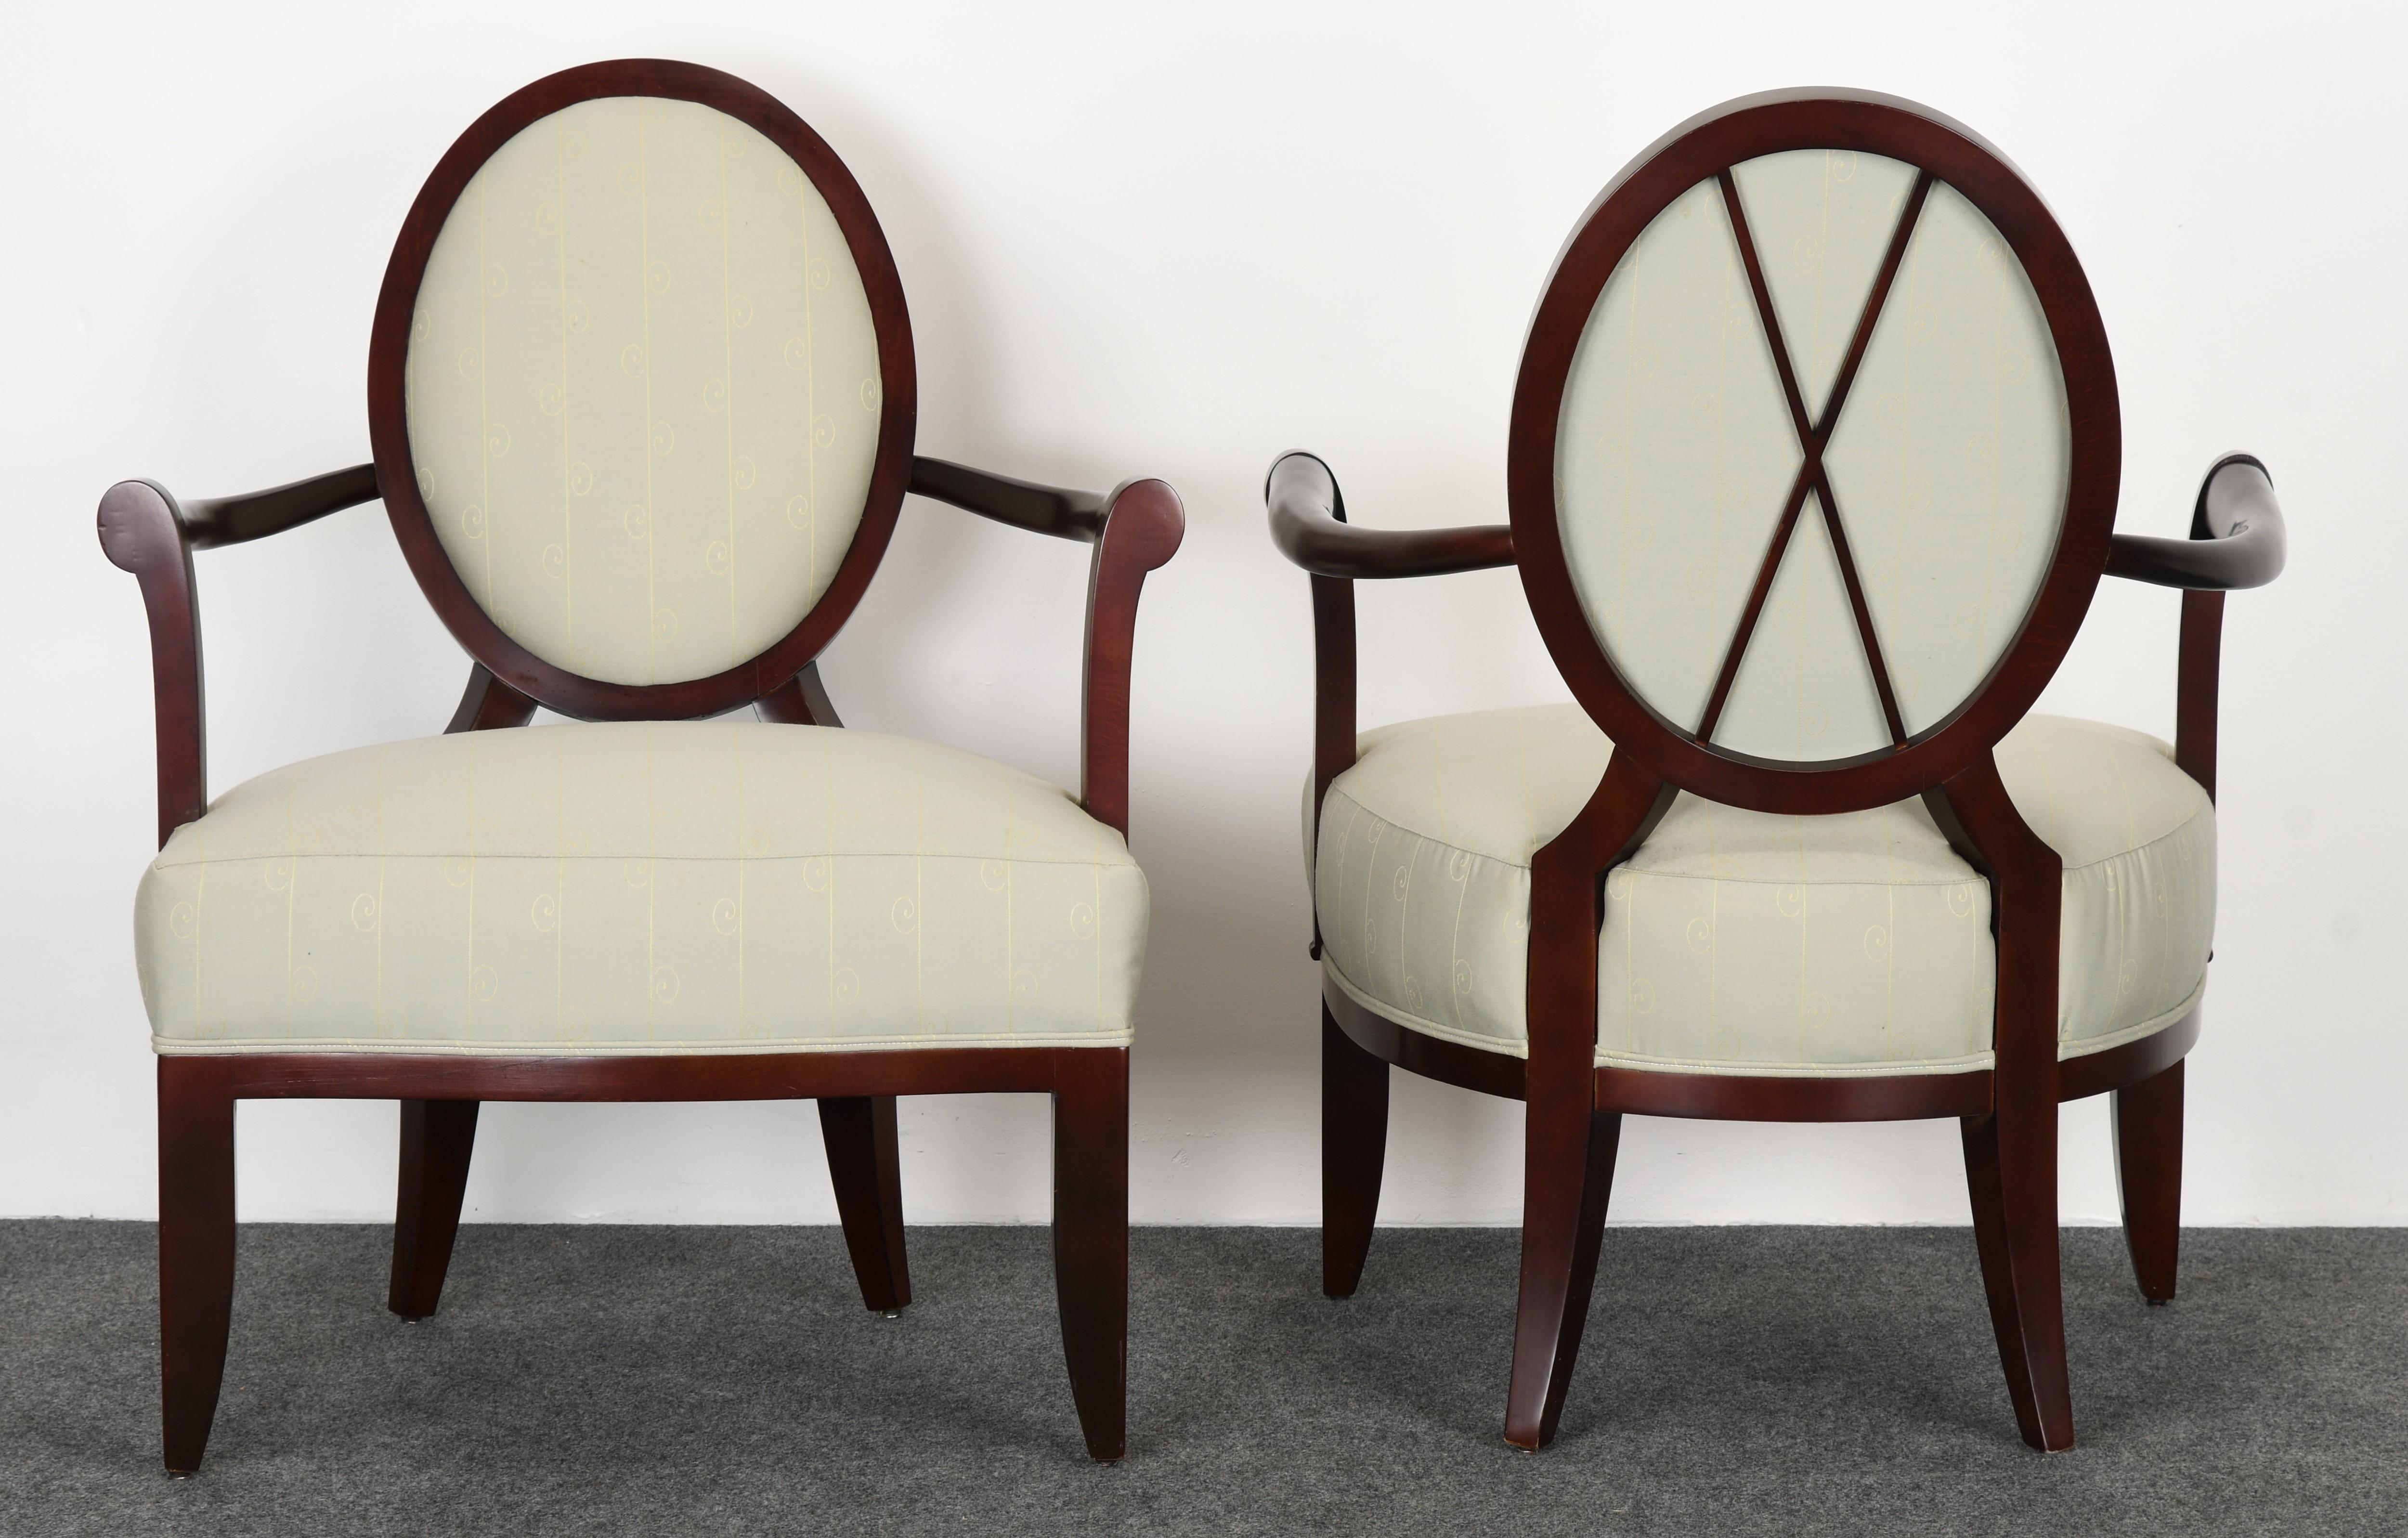 A gorgeous pair of Barbara Barry oval X-back lounge armchairs for Baker Furniture, 1990s. The chairs are made of maple with a mahogany finish upholstered in a light green fabric. The fabric is vintage but is in good condition overall with some minor